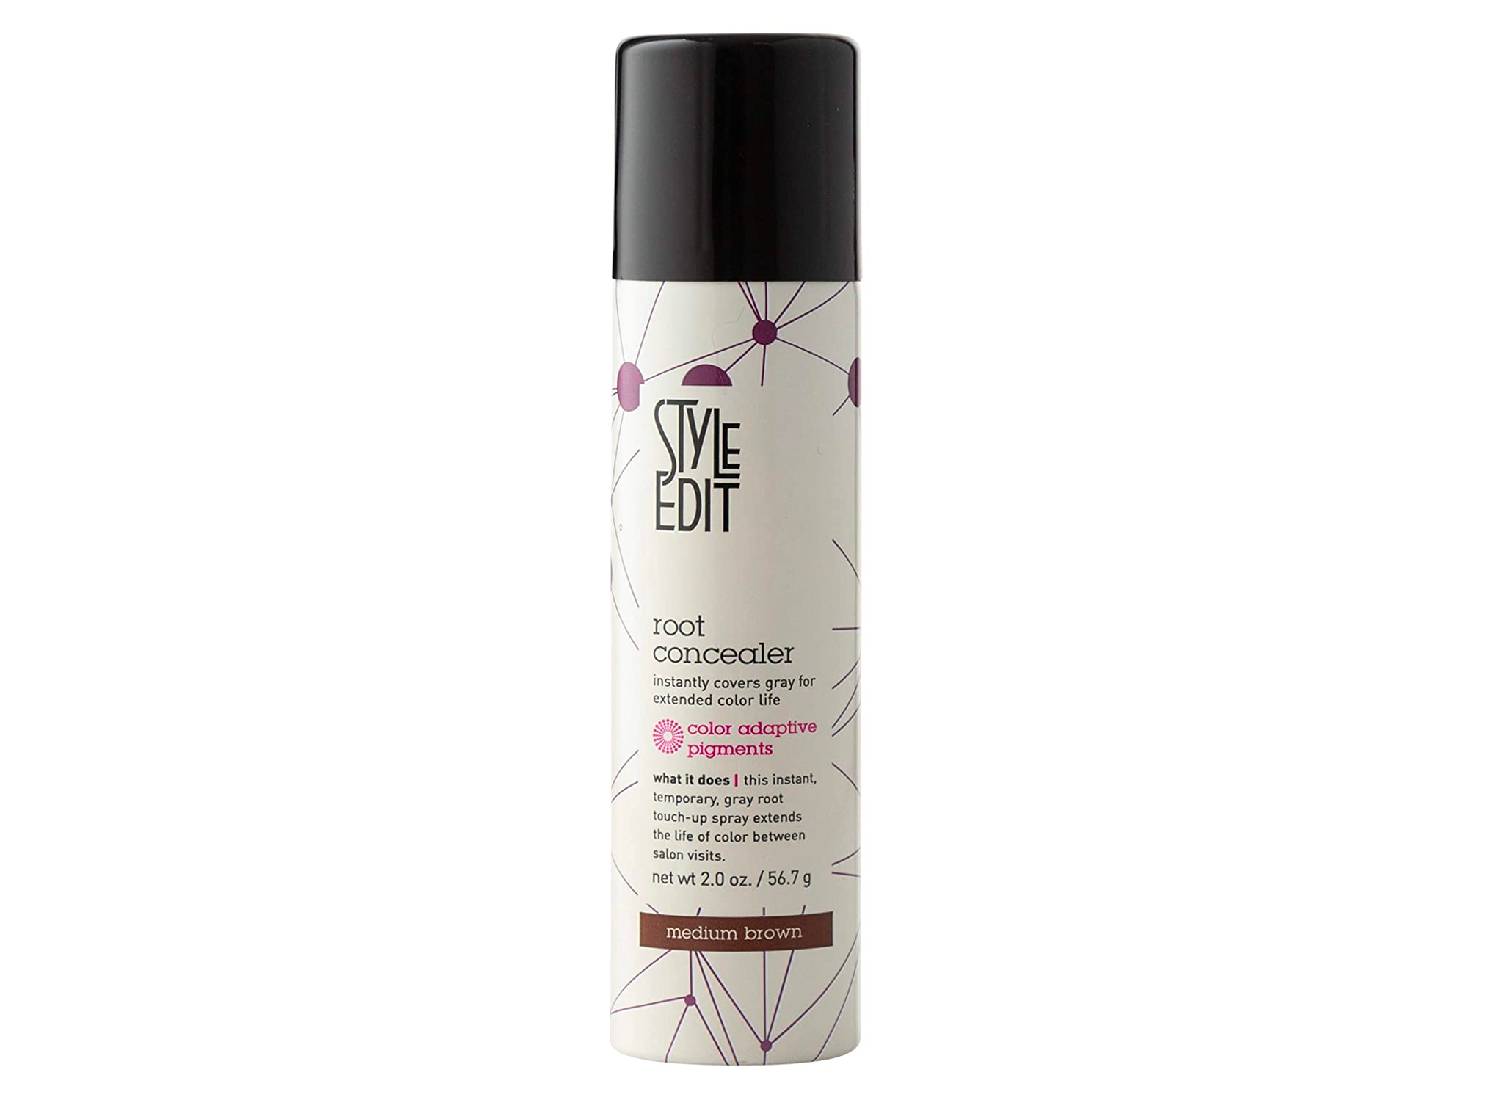 A can of the STYLE EDIT's medium brown root touch up spray